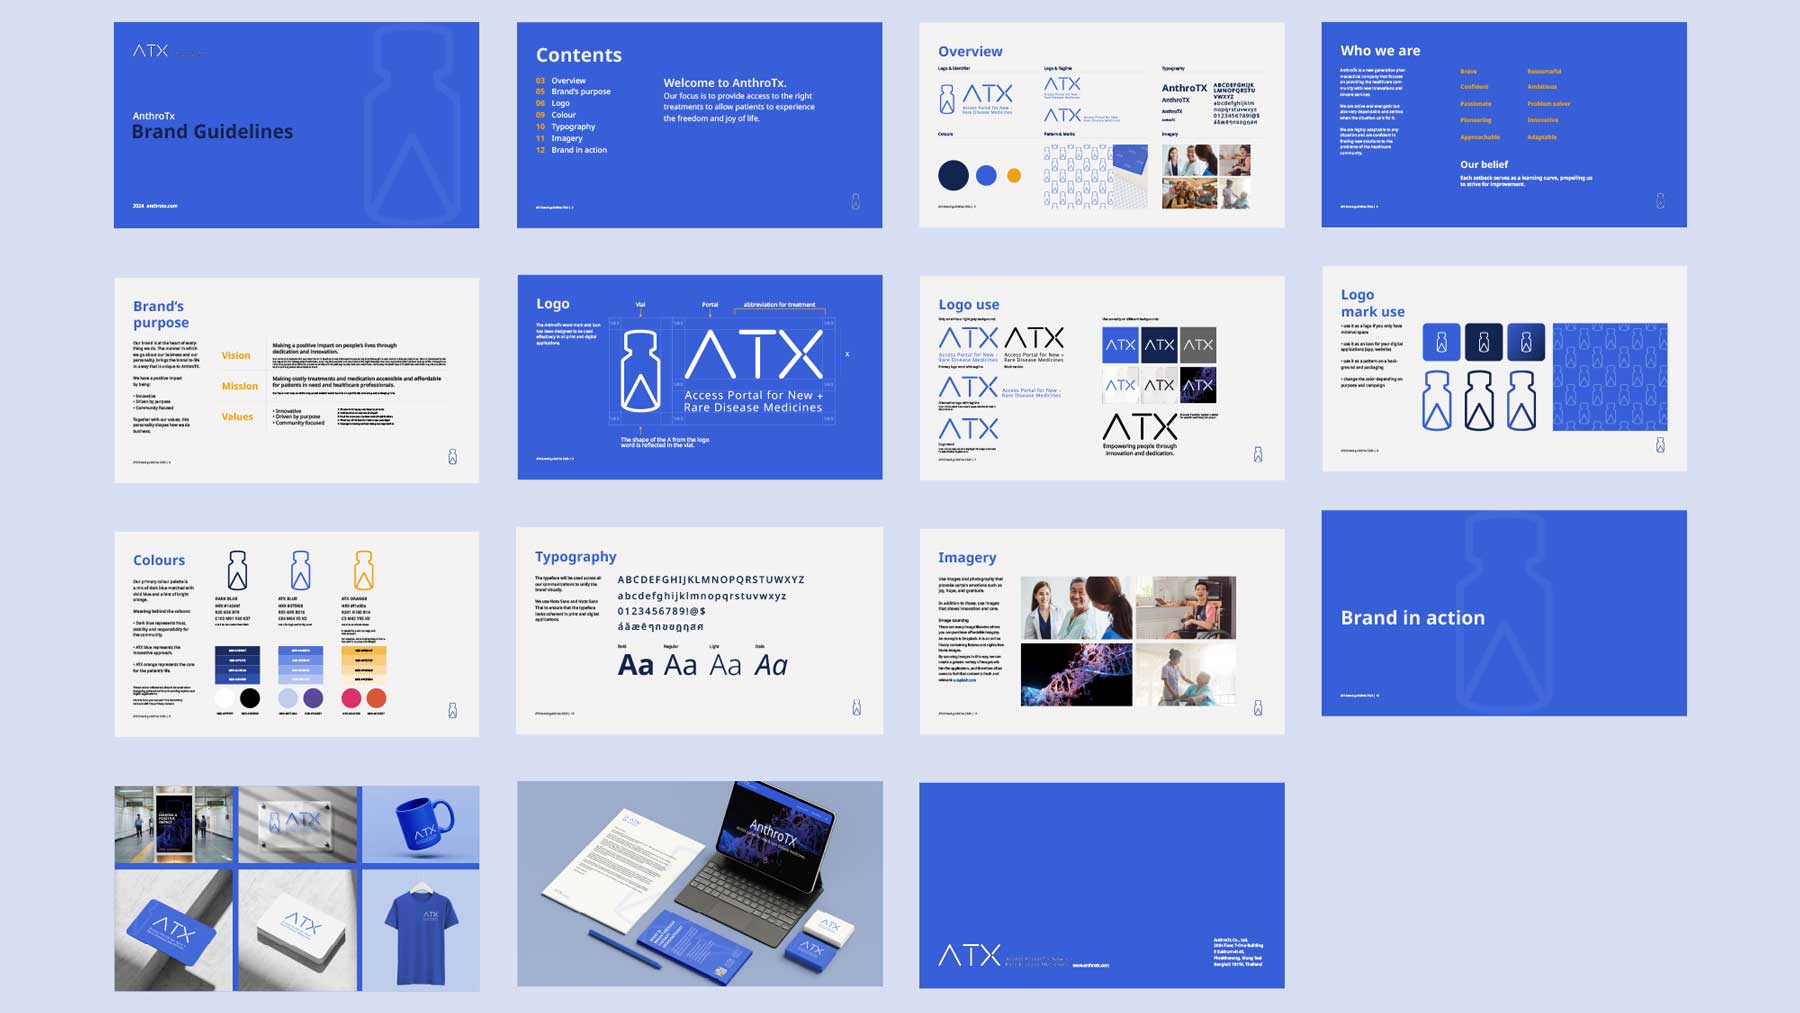 ATX Brand Guidelines